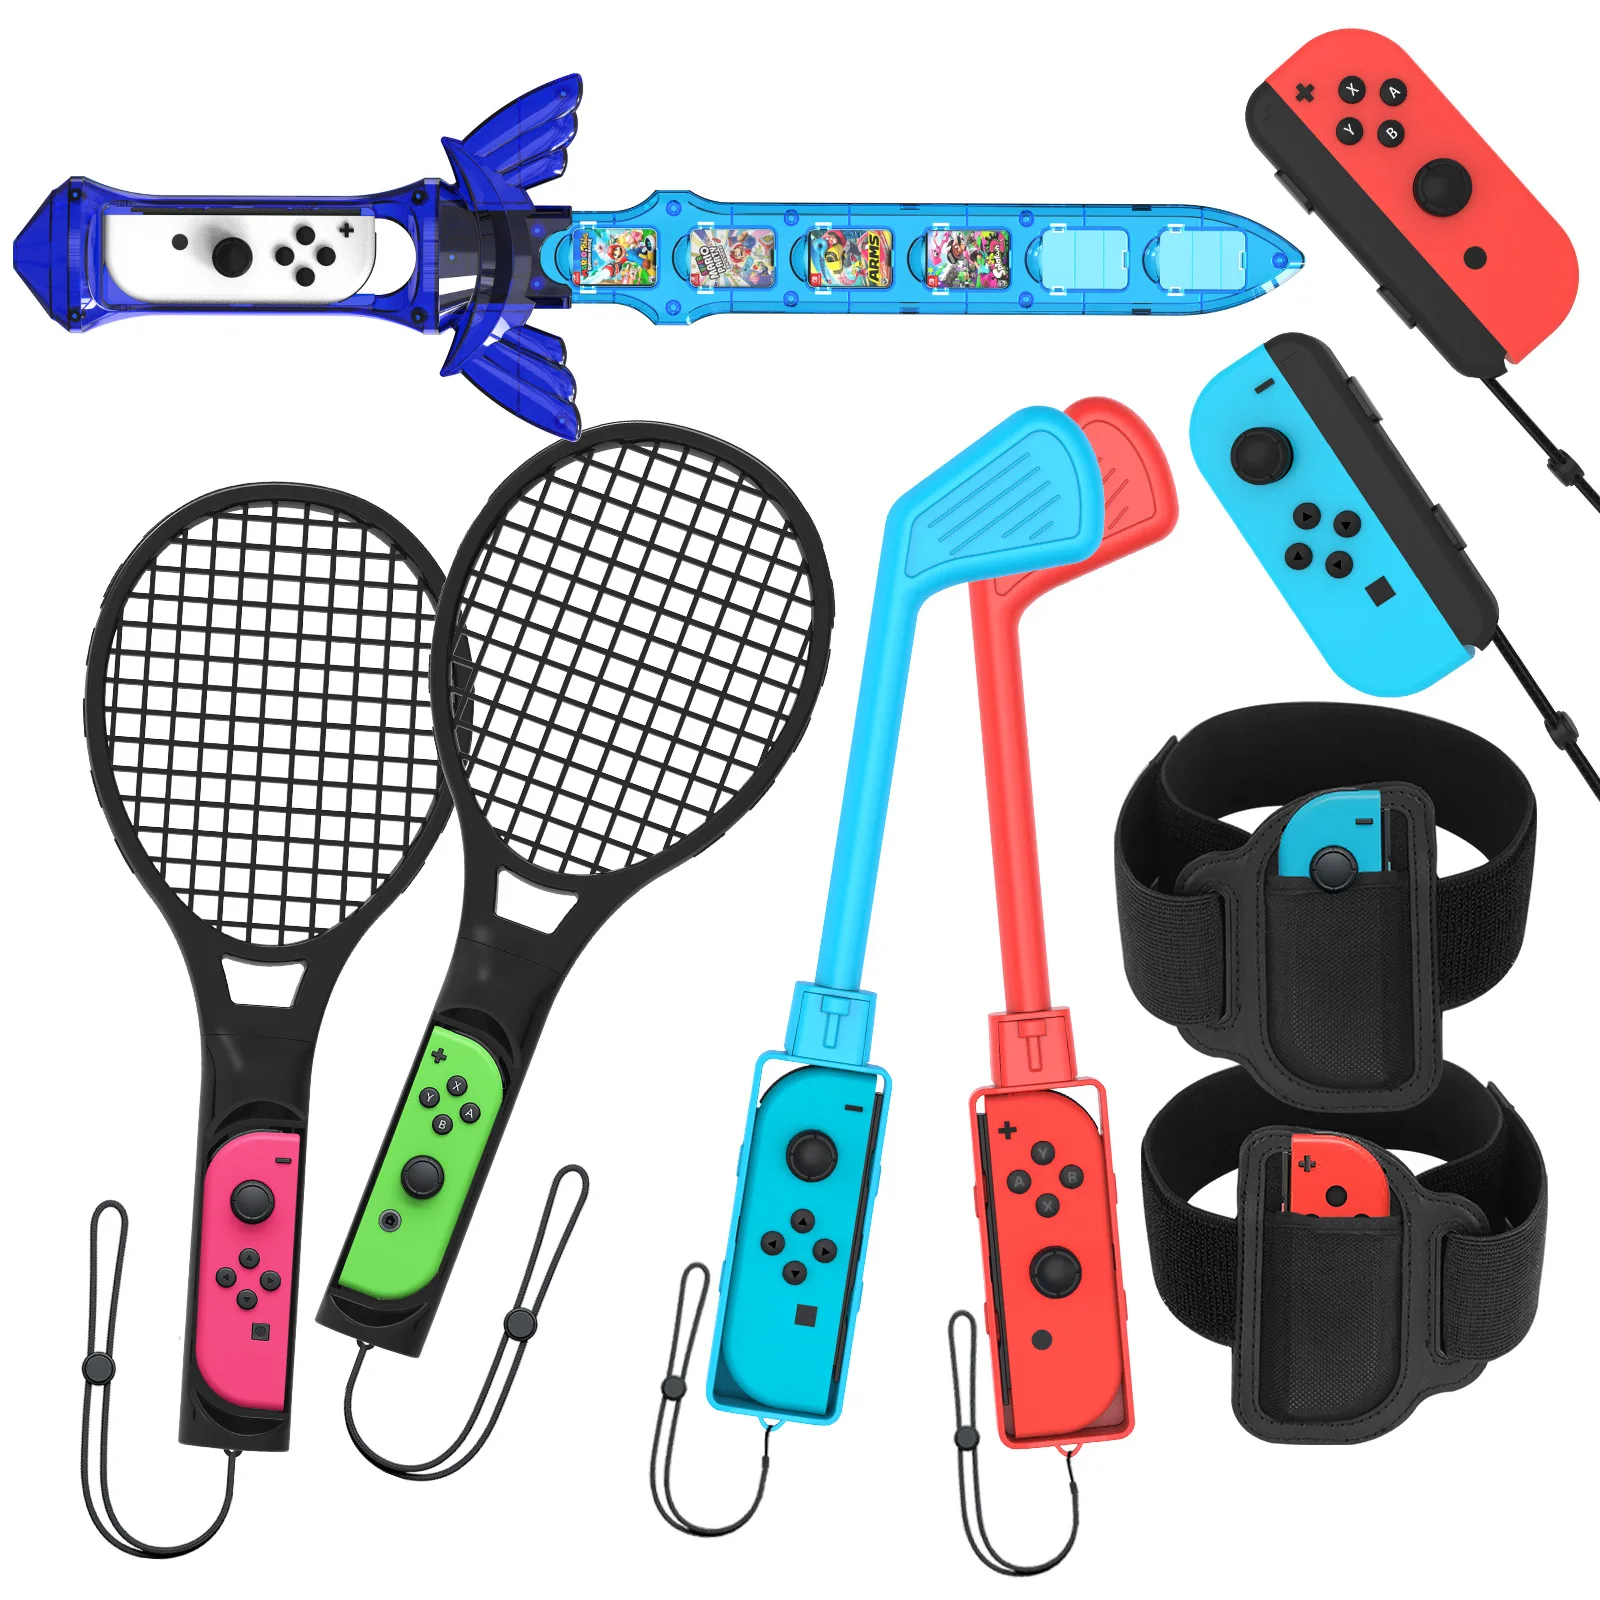 

9 in 1 Motion Control Game Accessories for Nintendo Switch Golf Club/Dancing Wristband Set/Tennis Racket/Leg Strap for NS